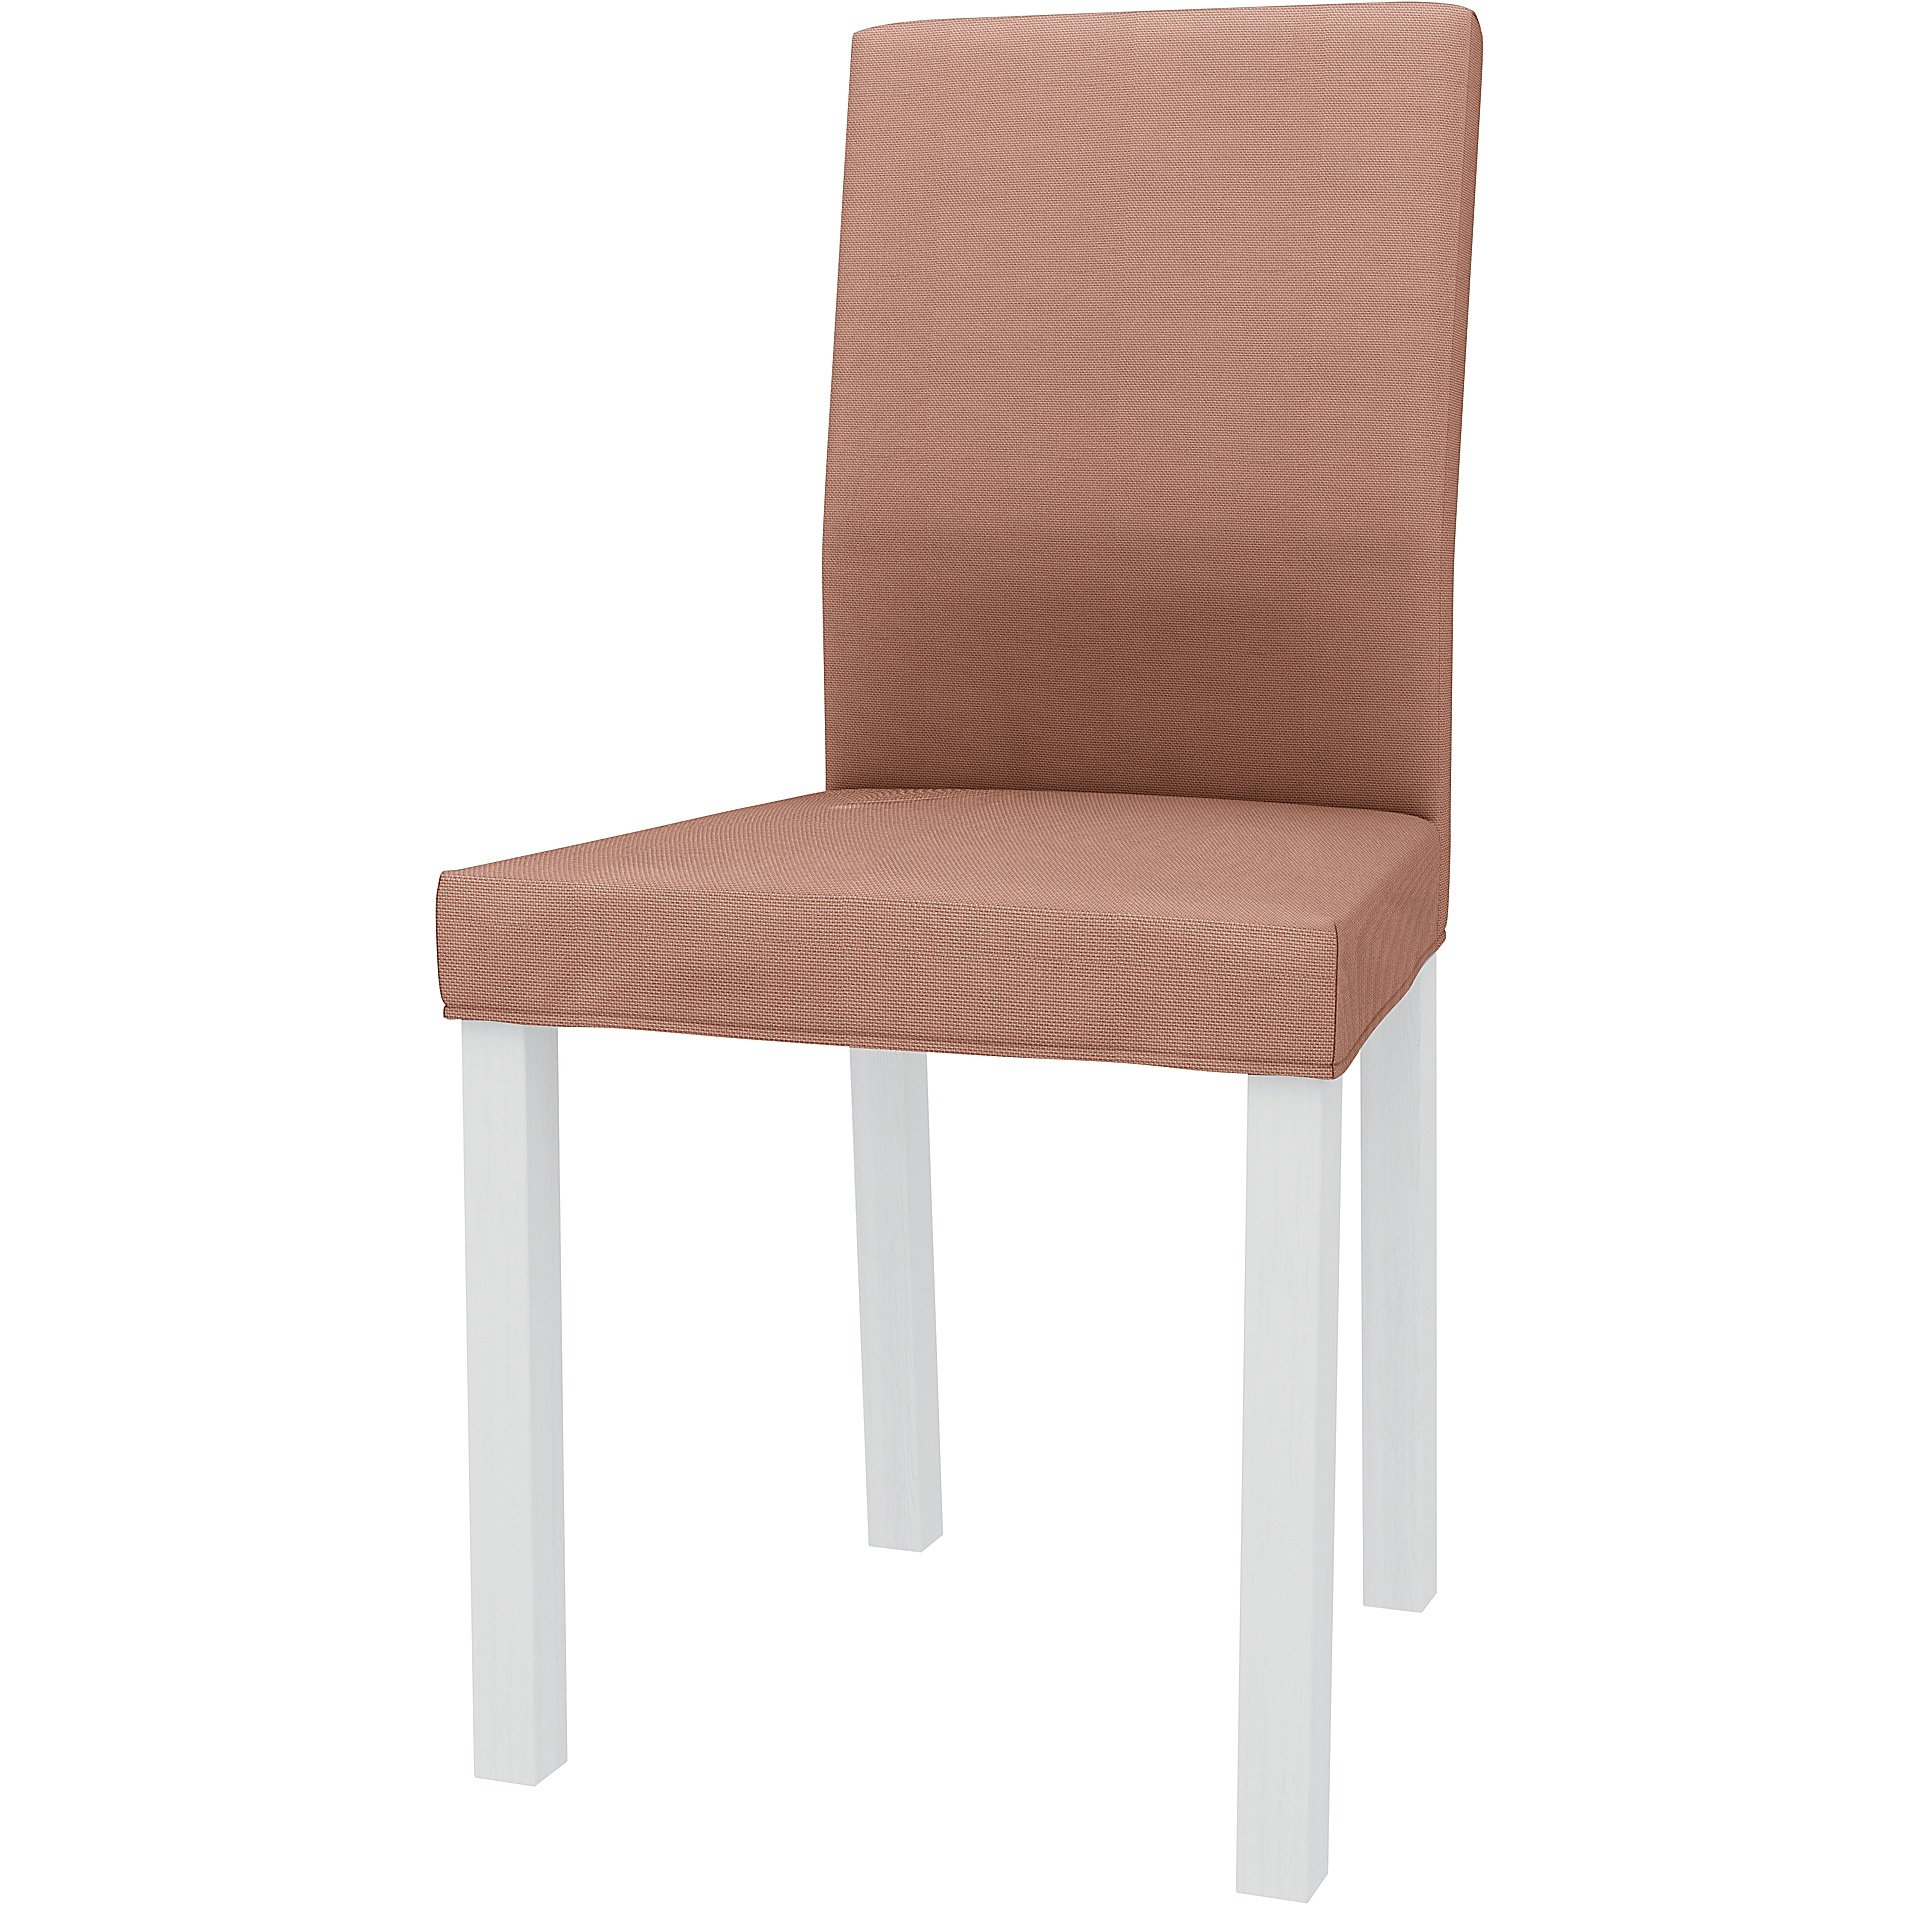 IKEA - KATTIL DINING CHAIR COVER, Dusty Pink, Outdoor - Bemz